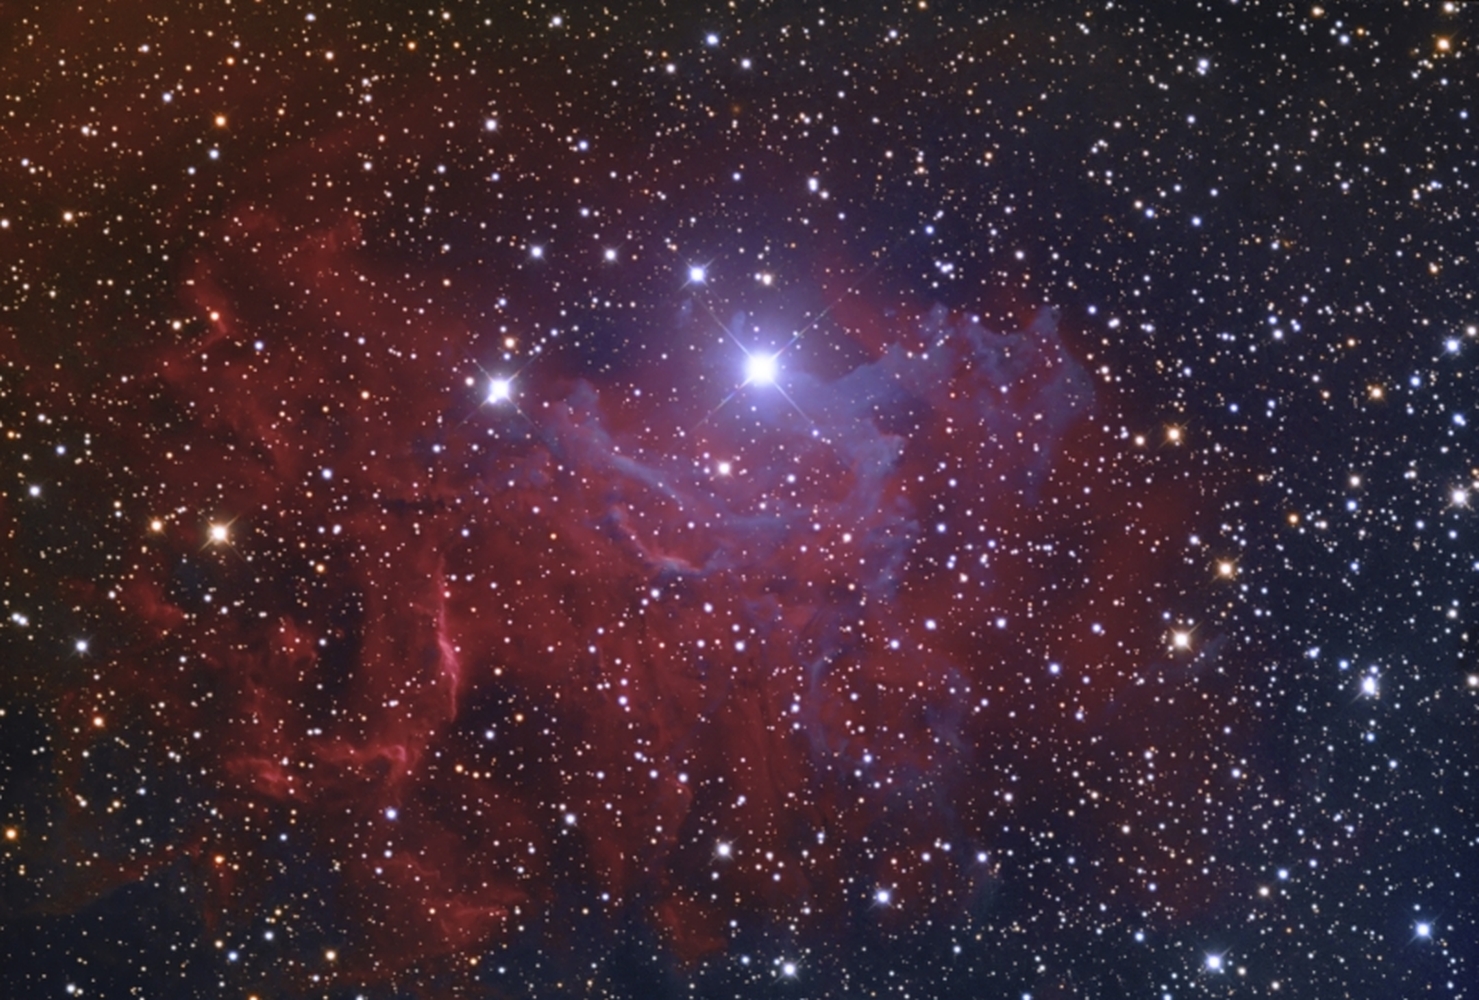 IC 405 from BMV Observatories